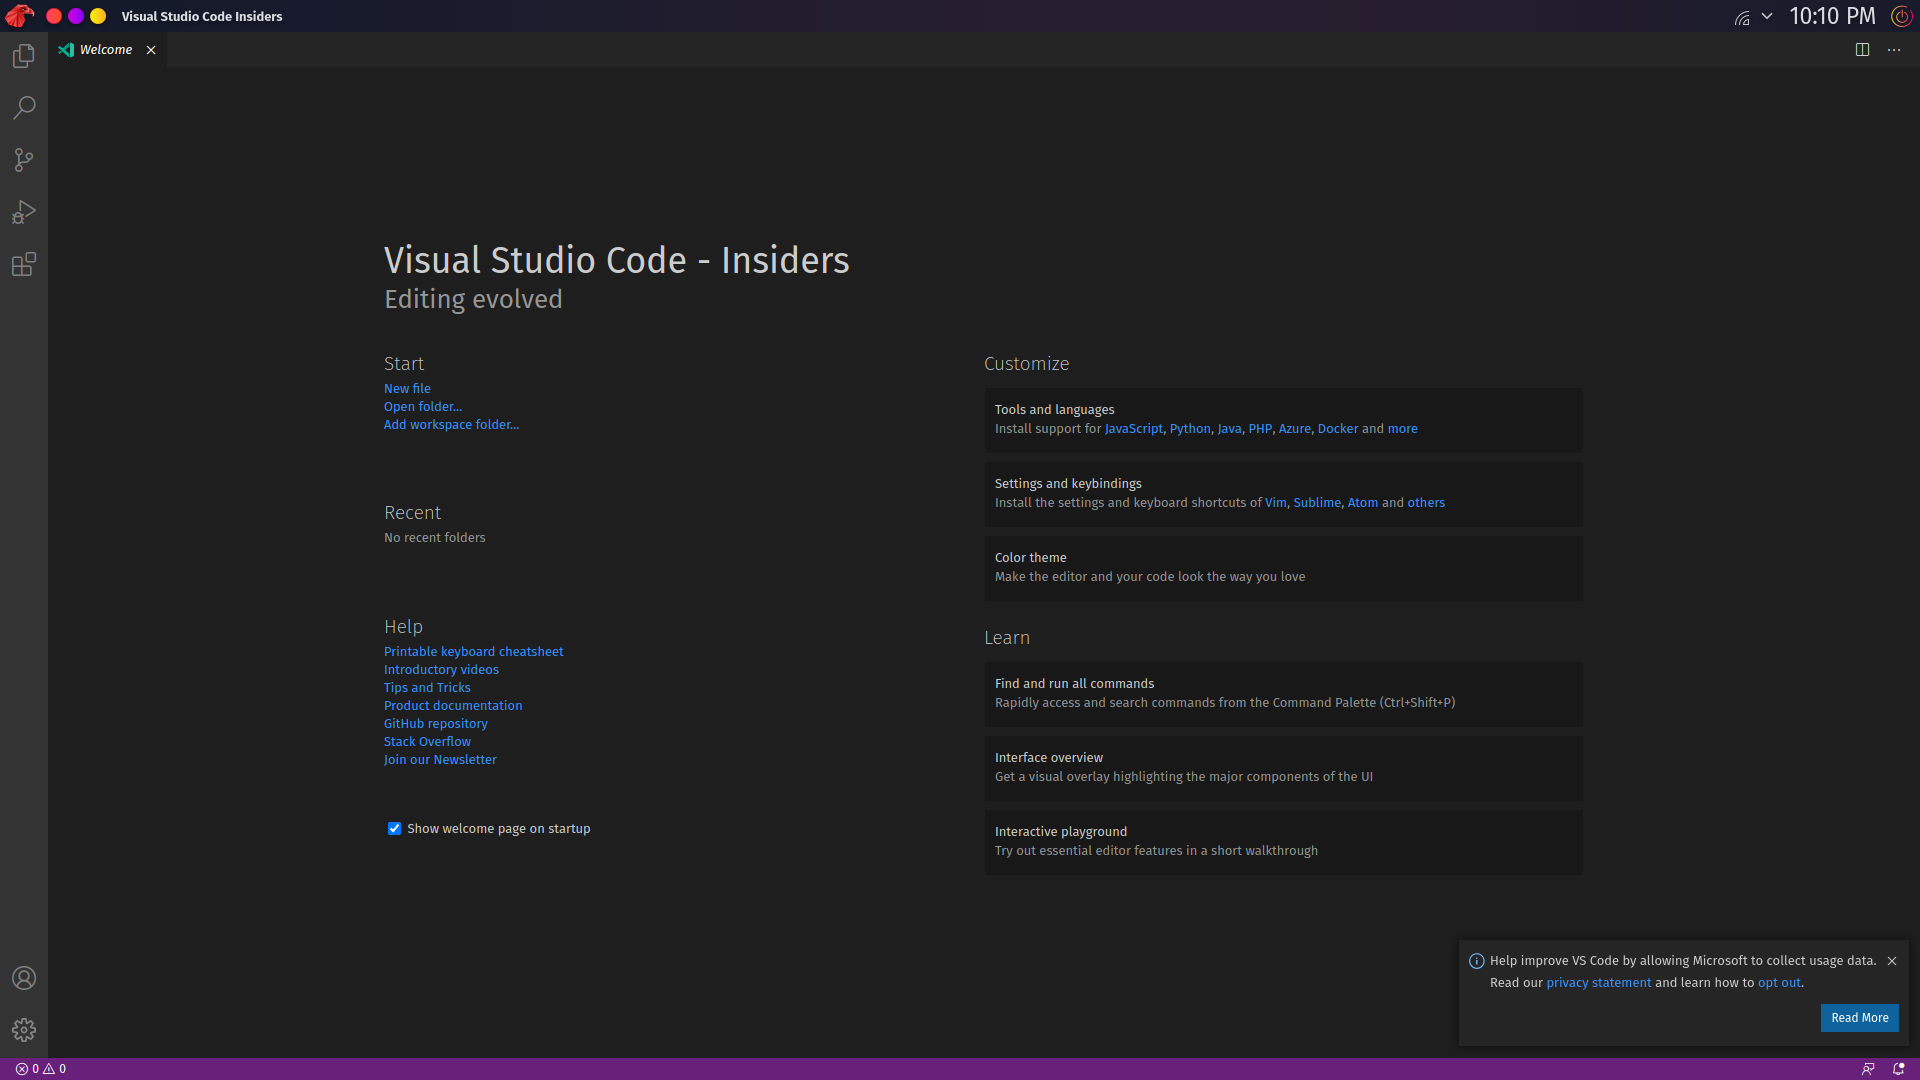 linux - How to change the font of Visual Studio Code's UI? - Stack Overflow